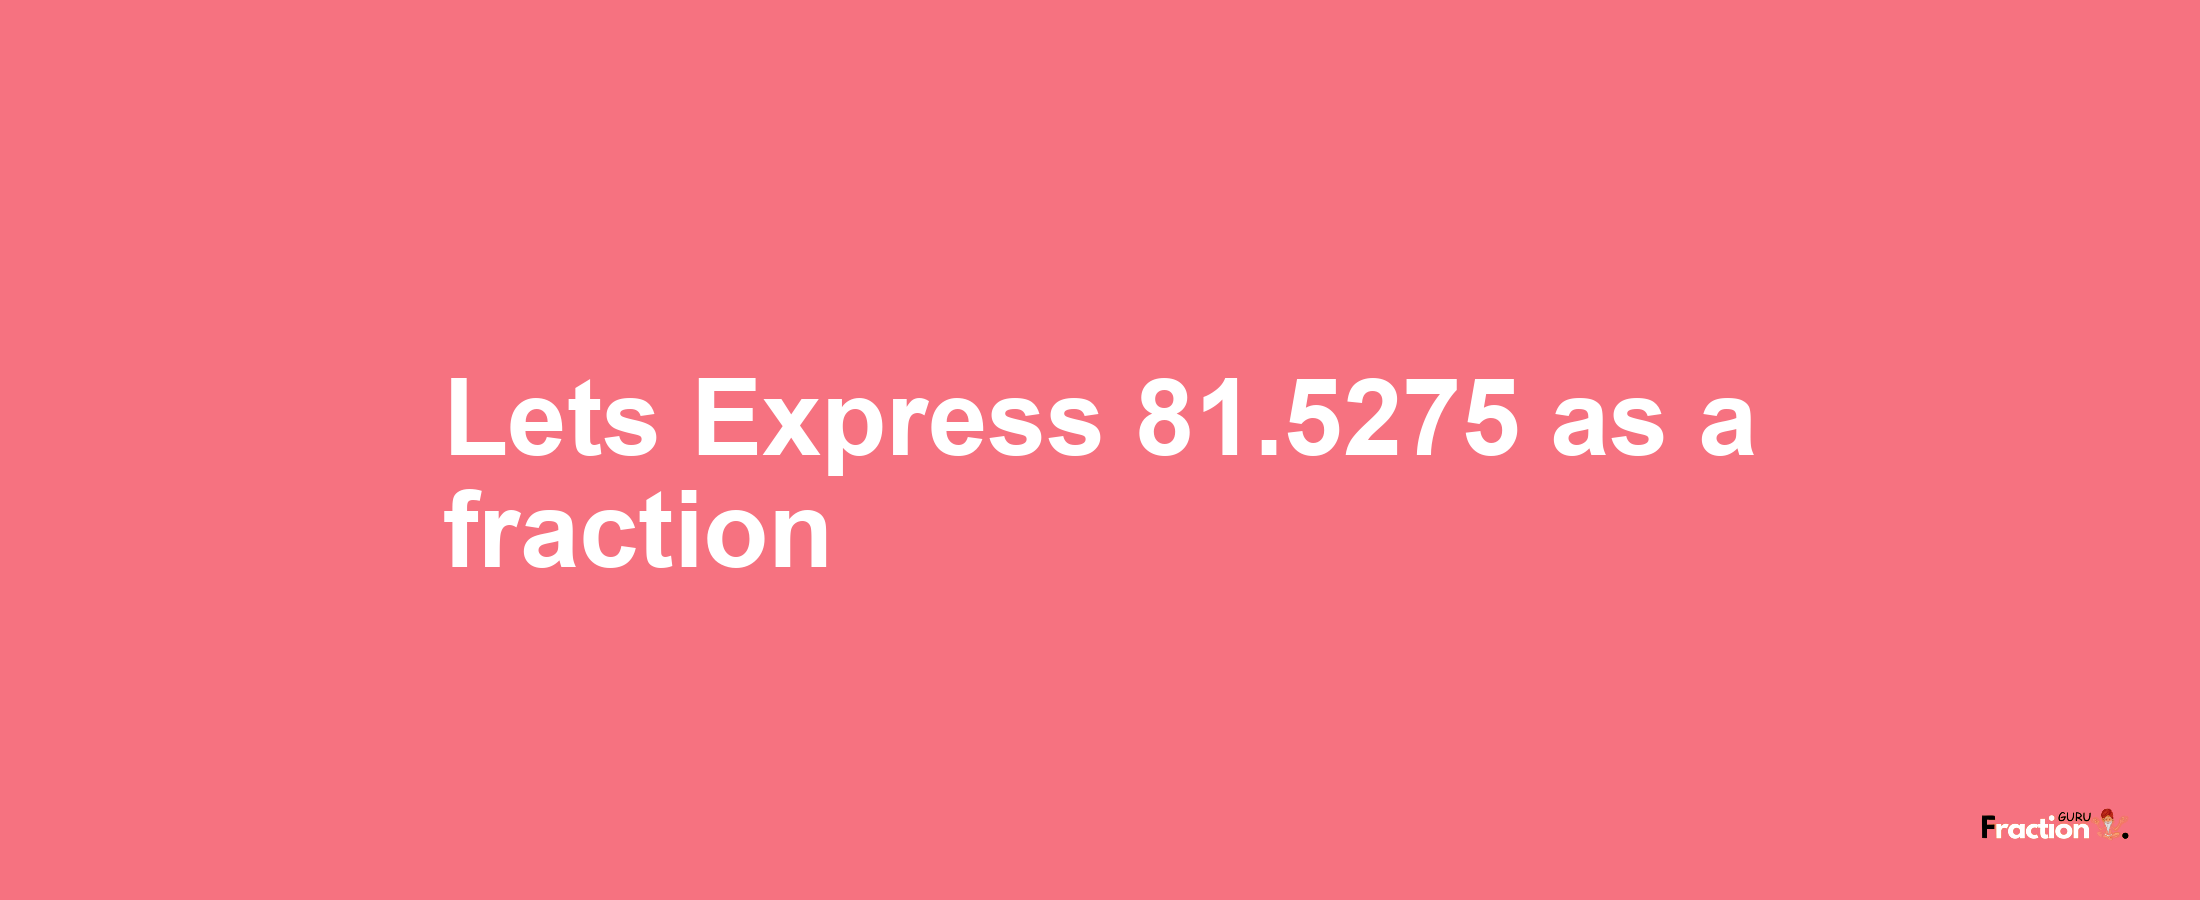 Lets Express 81.5275 as afraction